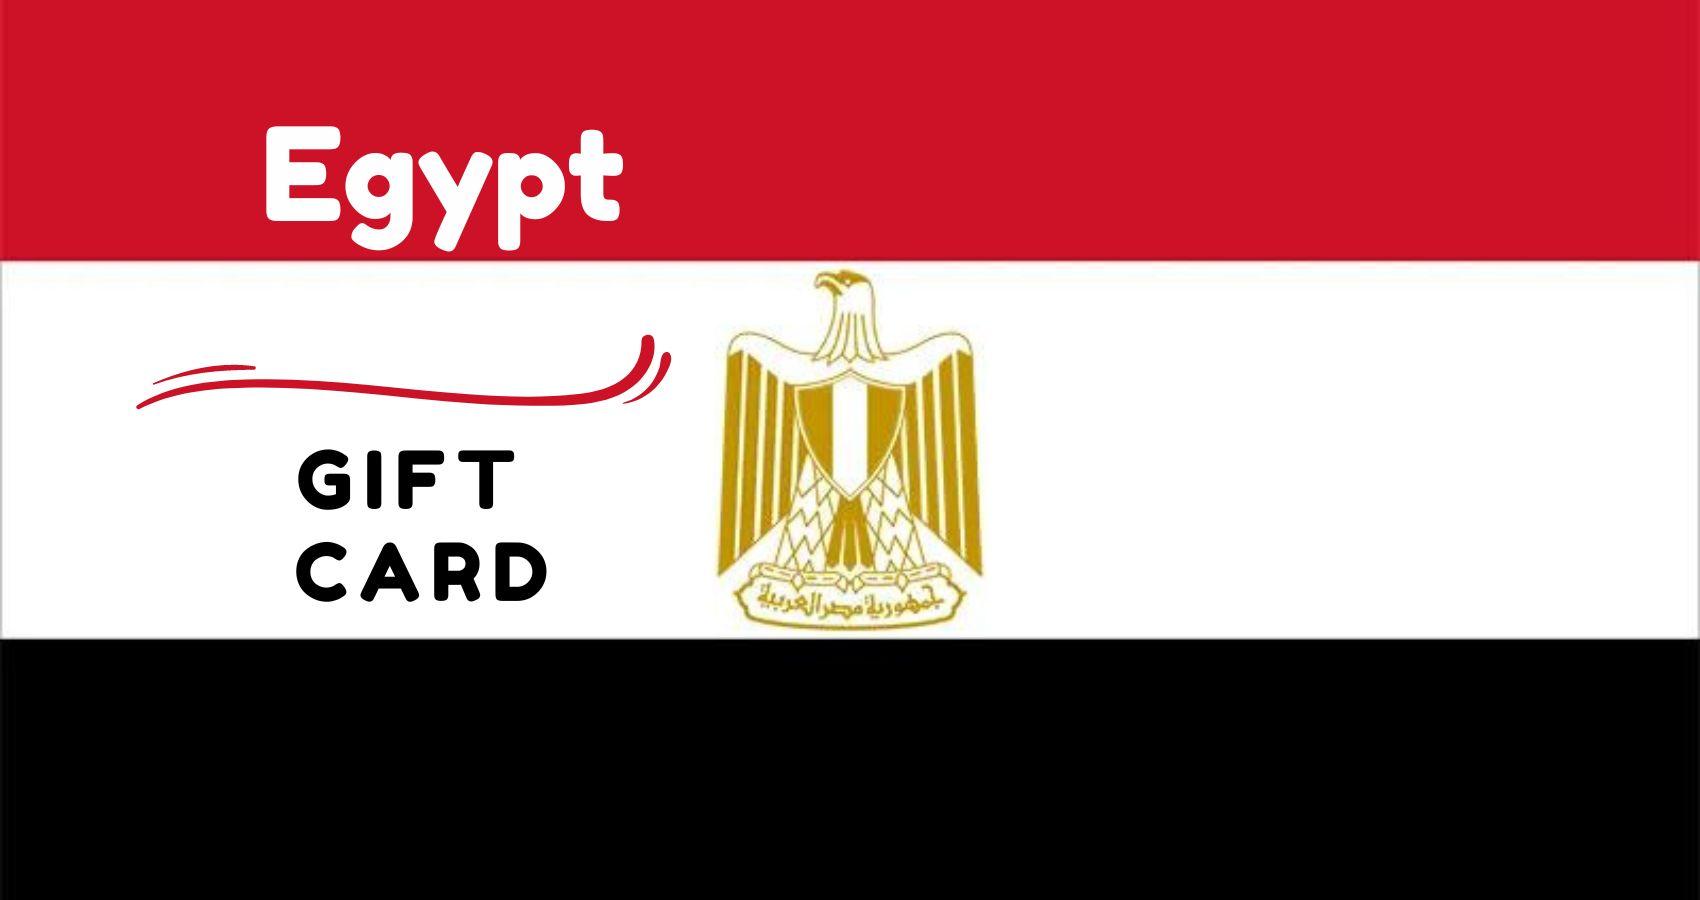 Does Egypt Have Gift Cards